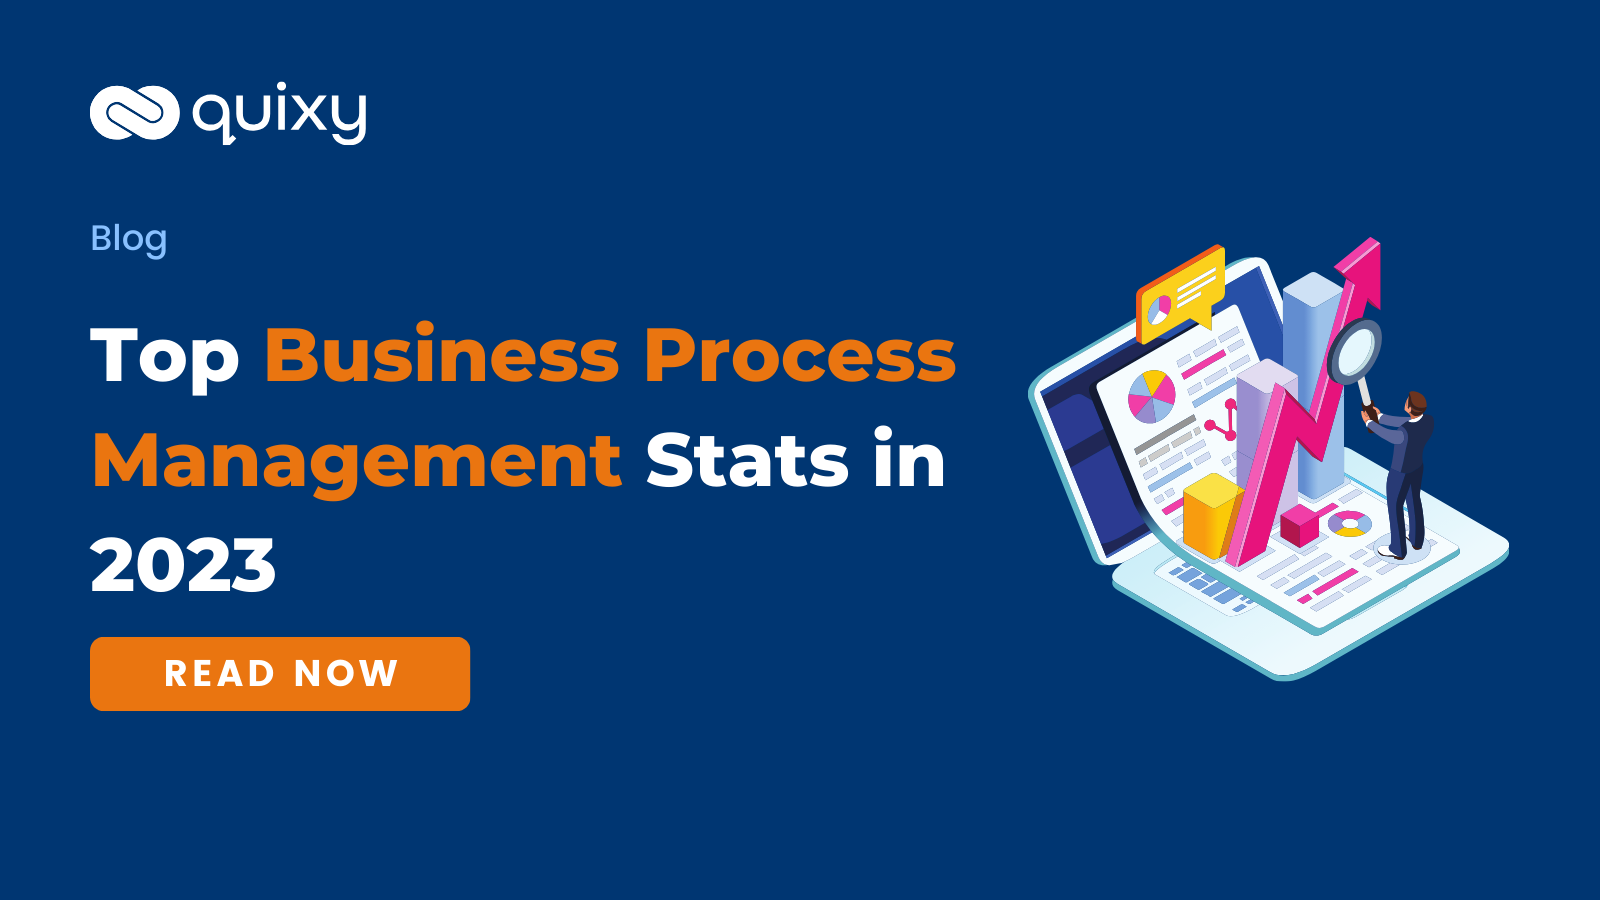 Top Business Process Management Stats In 2023 